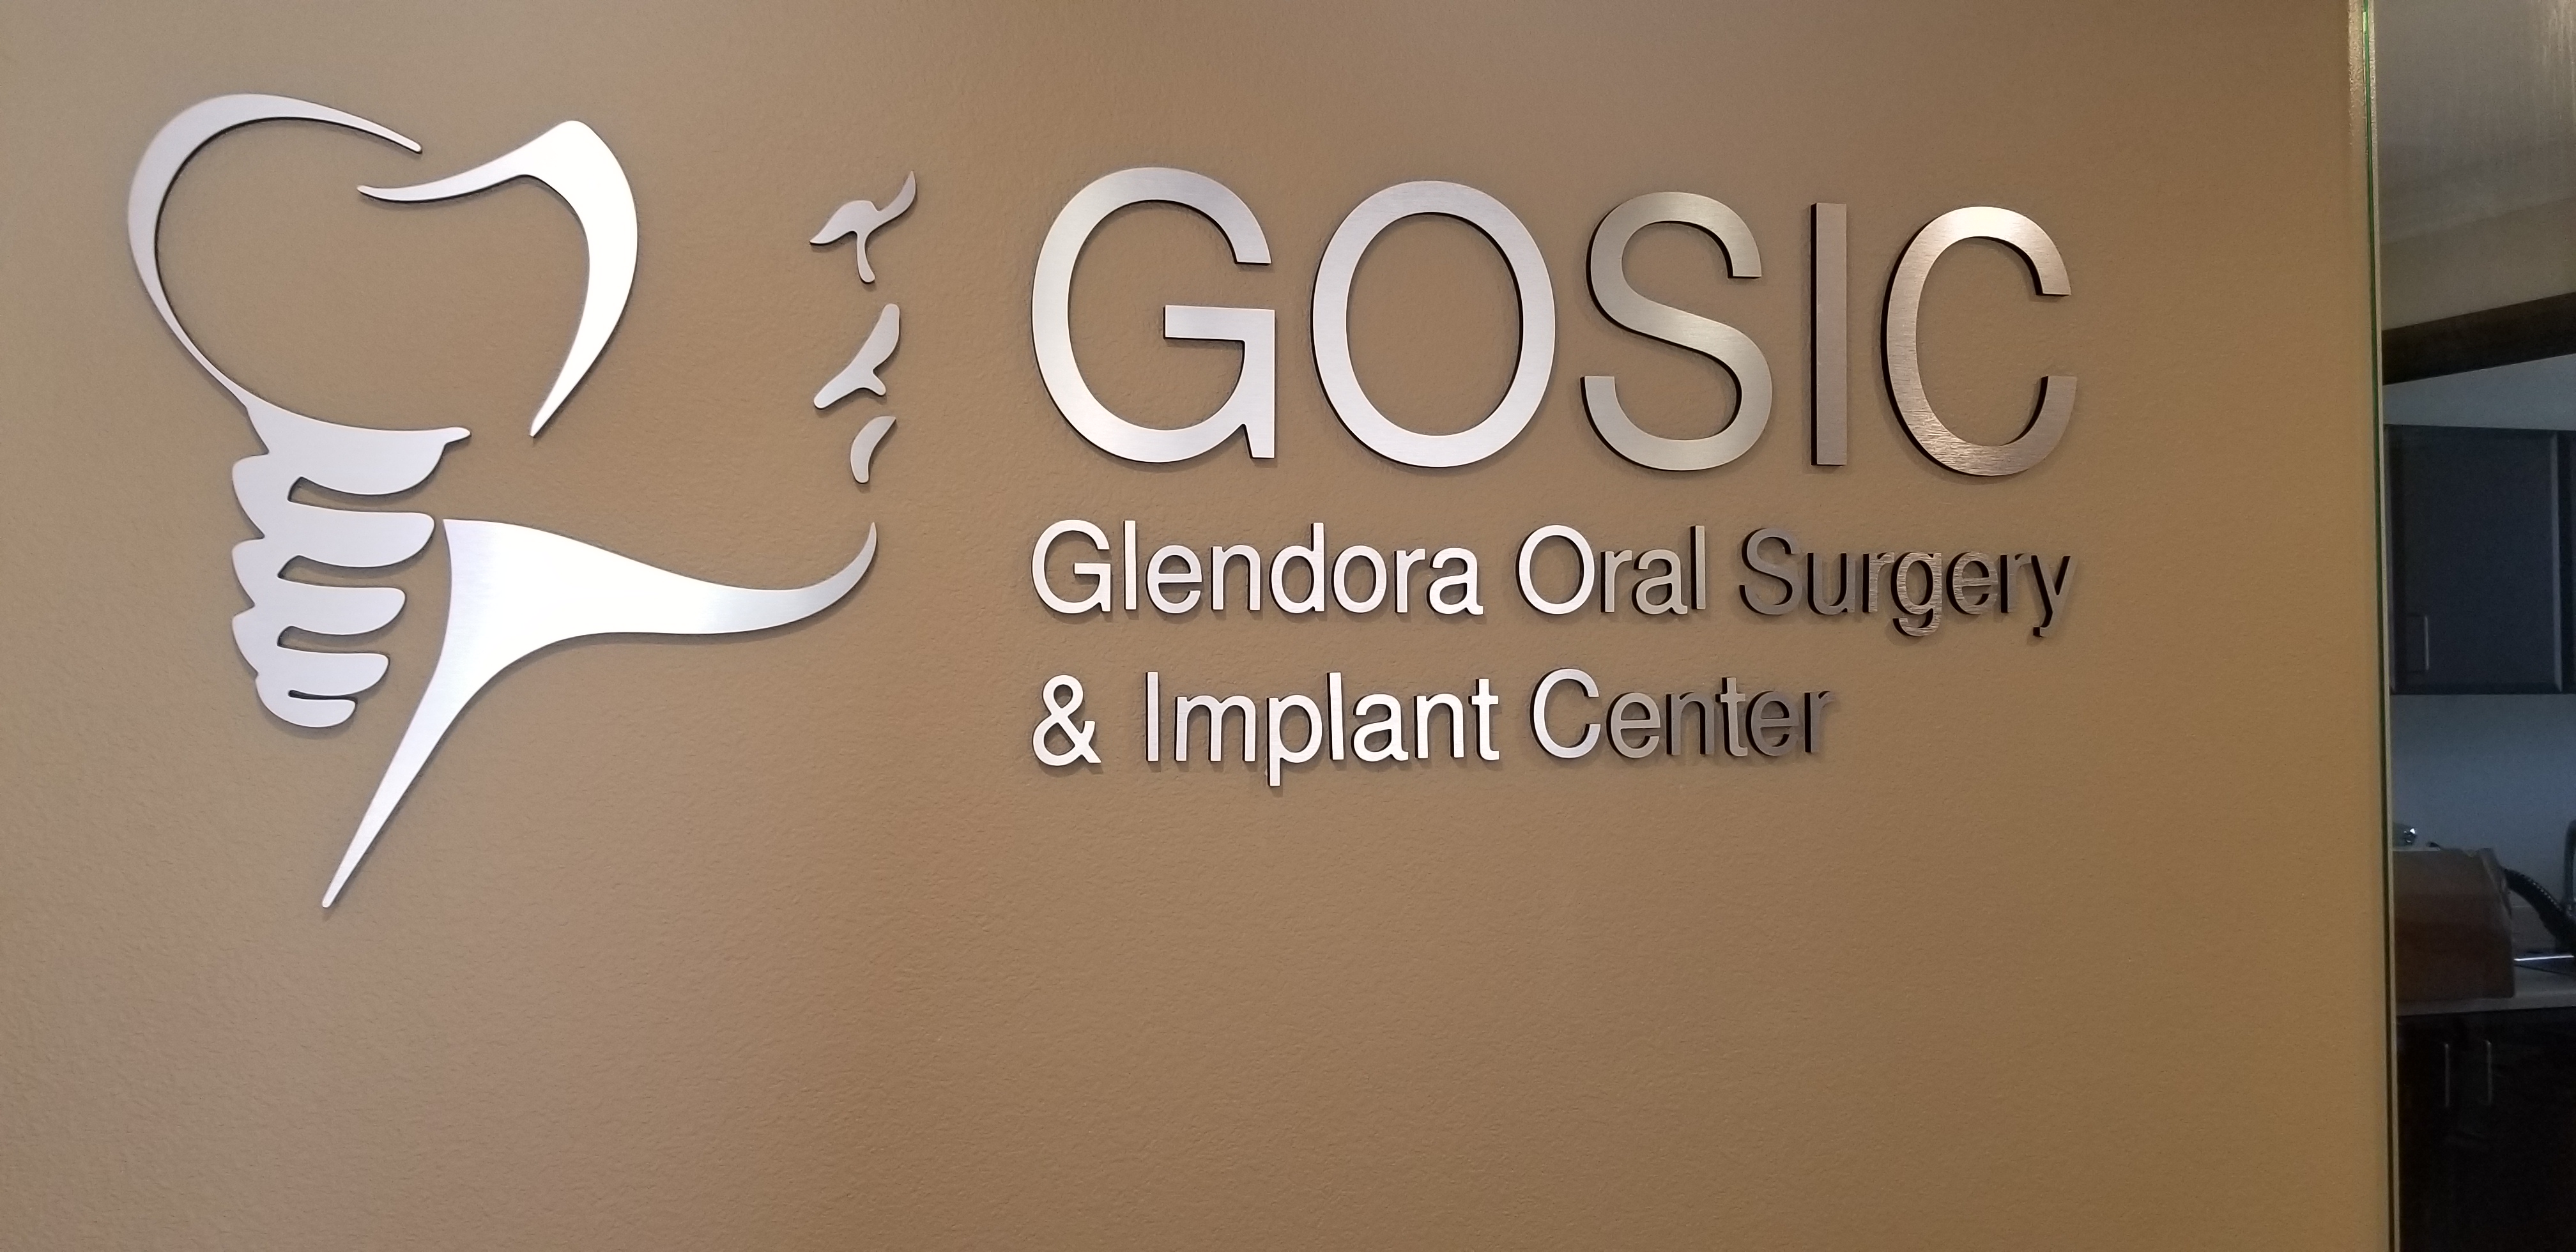 You are currently viewing Dental Clinic Lobby Sign for Glendora Oral Surgery